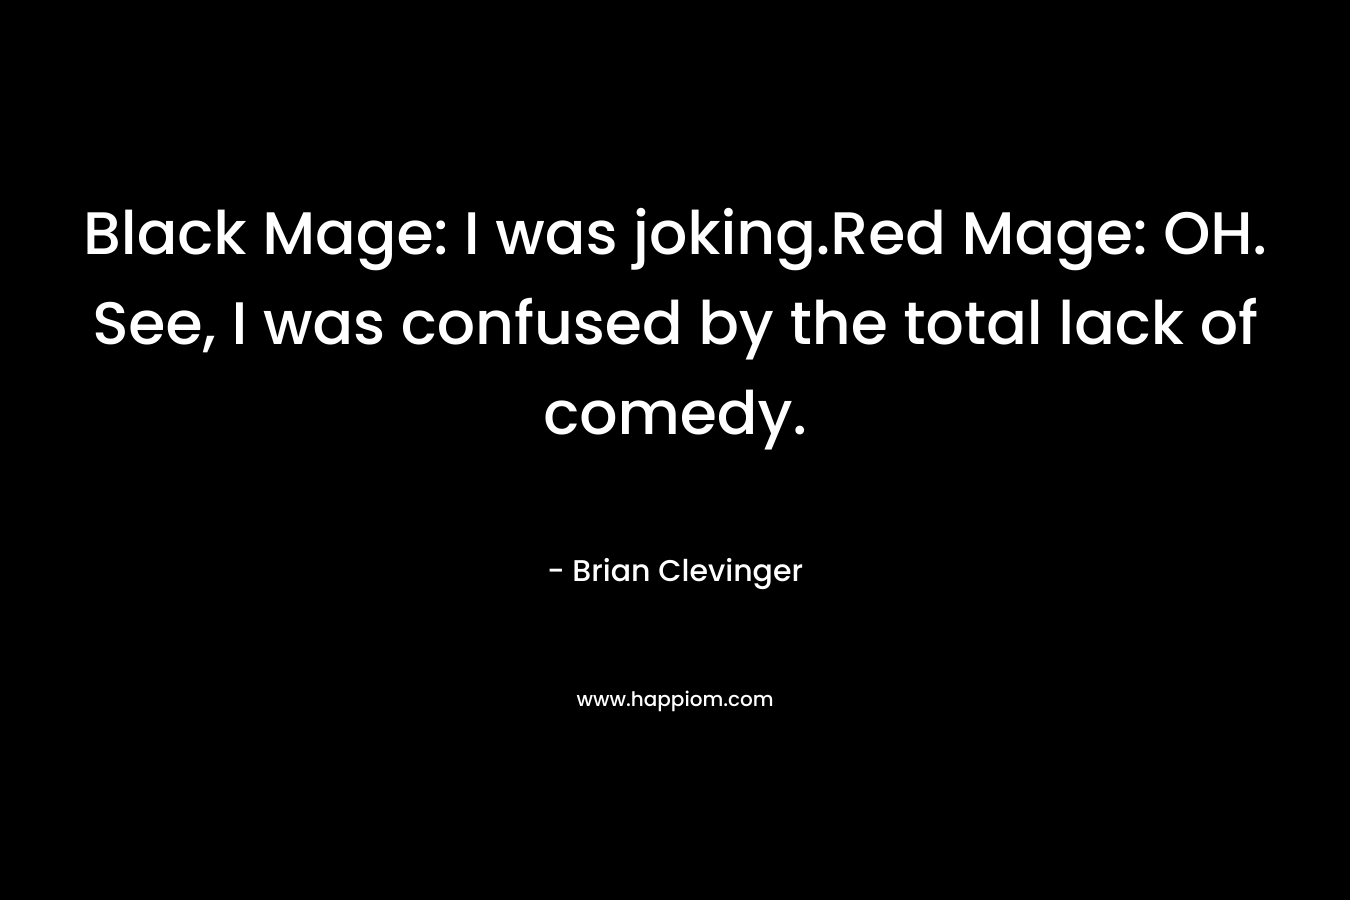 Black Mage: I was joking.Red Mage: OH. See, I was confused by the total lack of comedy. – Brian Clevinger